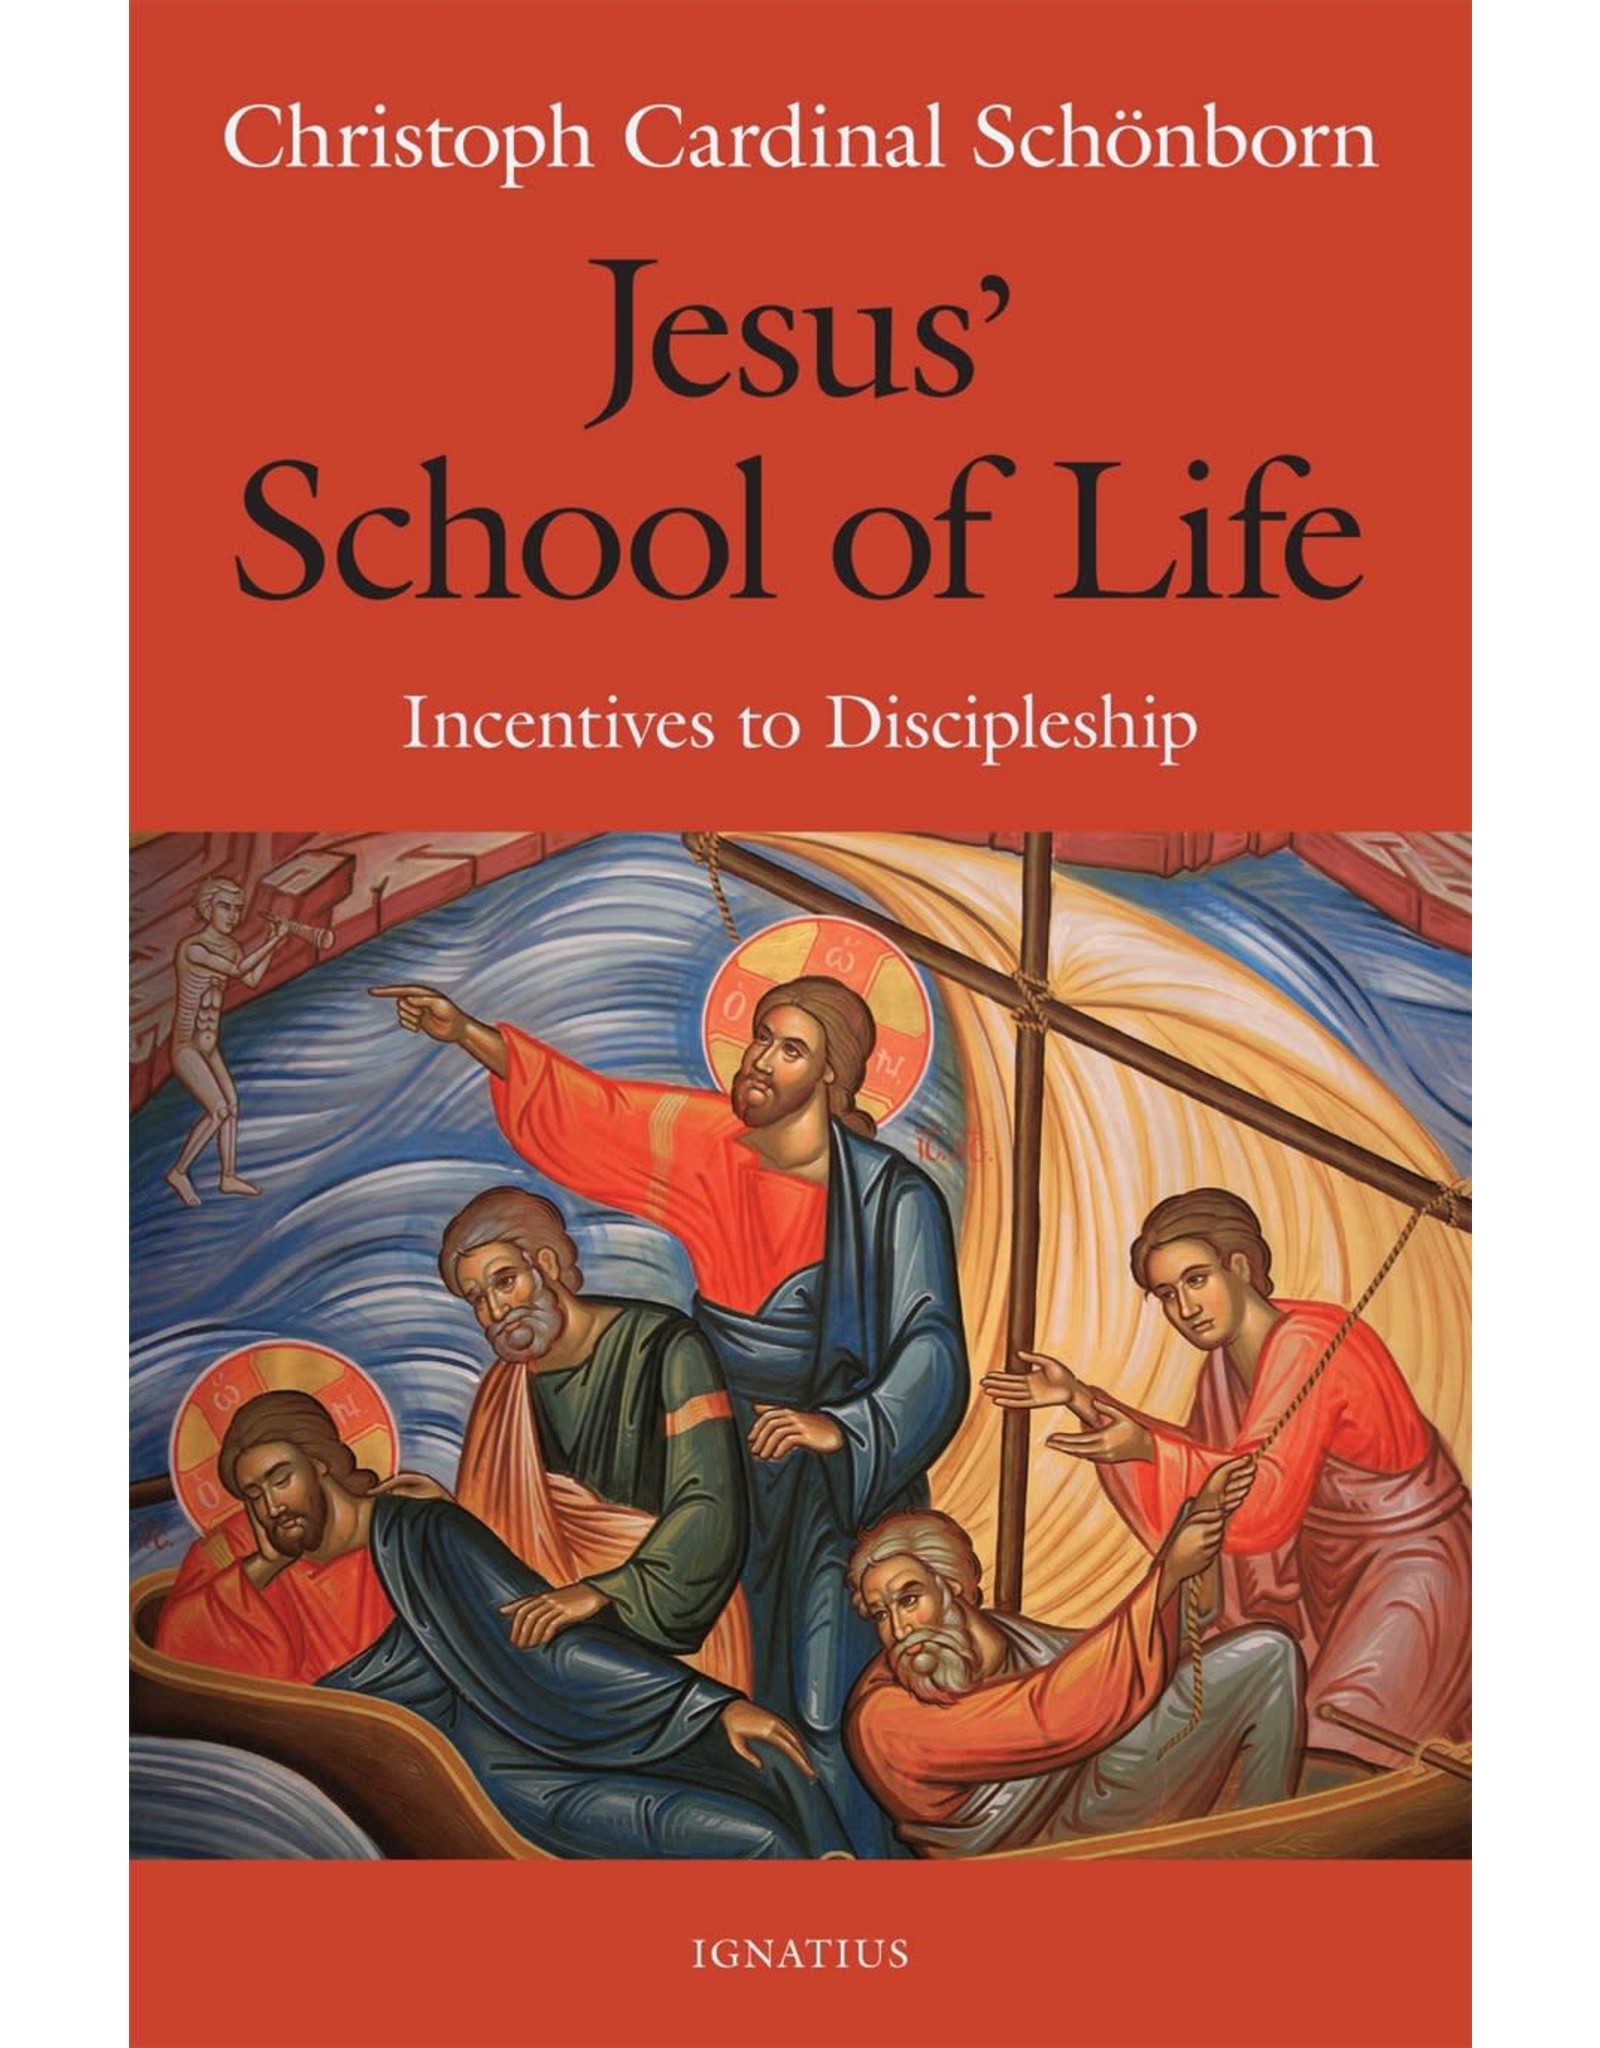 Jesus' School of Life: Incentives to Discipleship